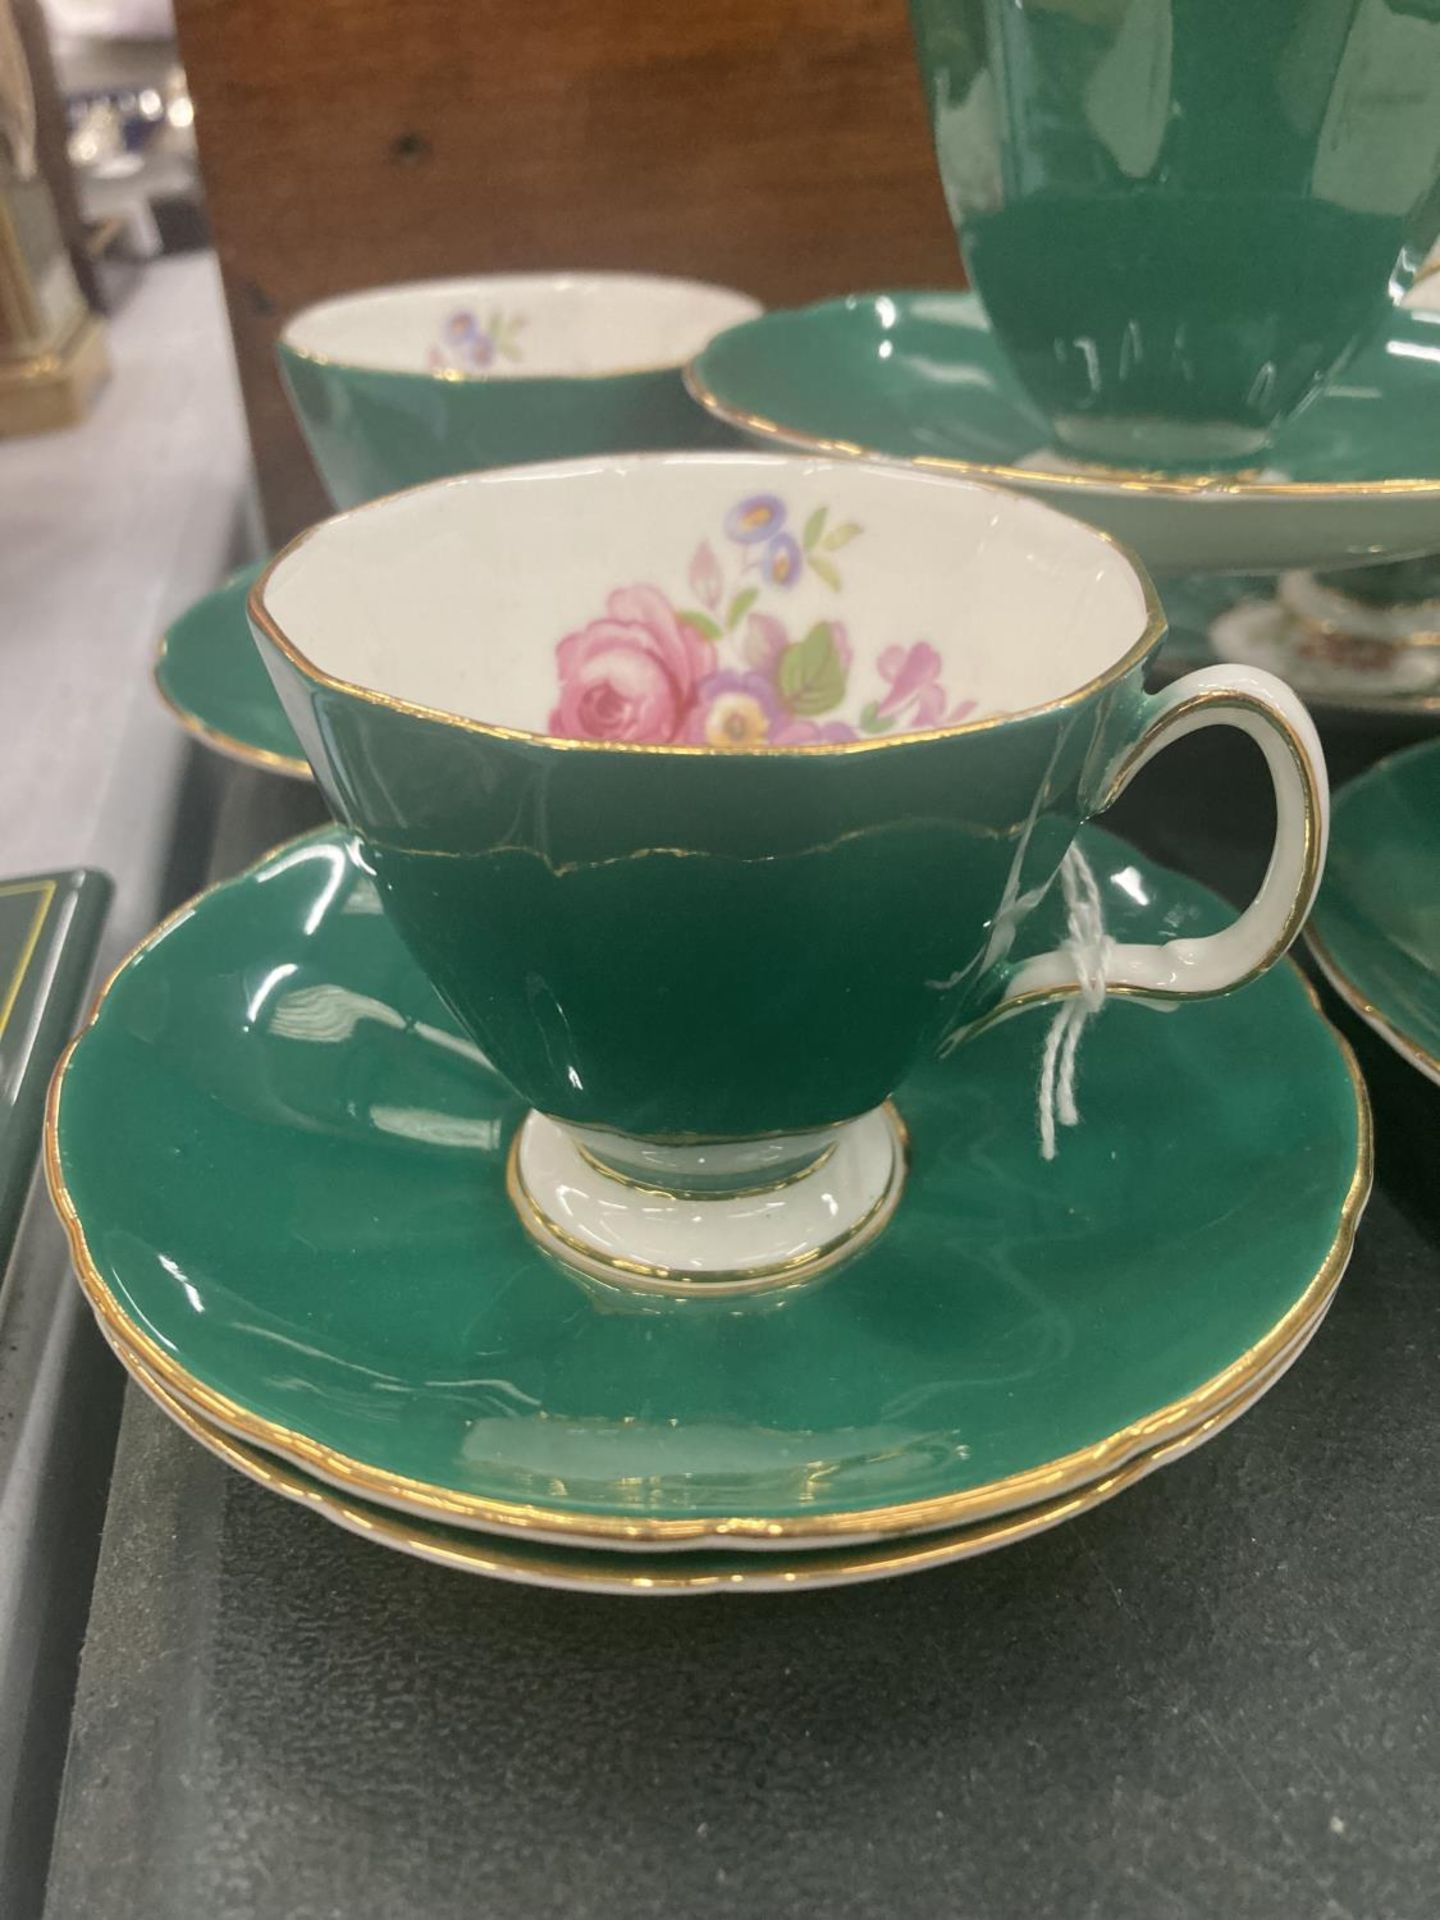 FIVE ADDERLEY CHINA CUPS AND SIX SAUCERS IN A DARK GREEN WITH A FLORAL PATTERN - Image 2 of 4